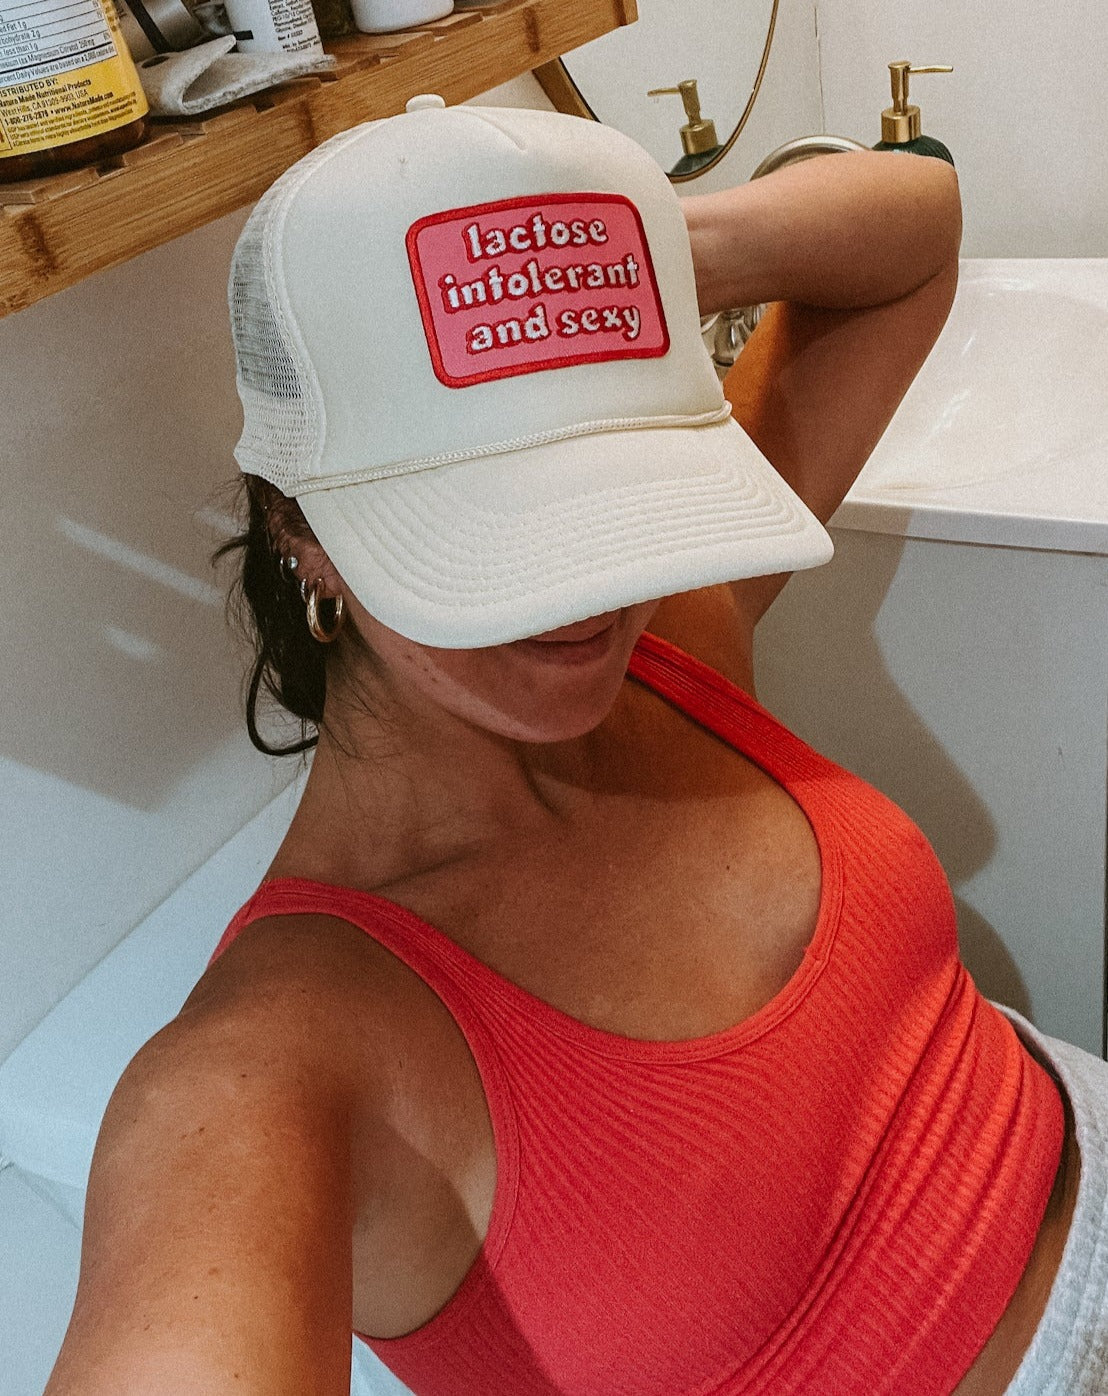 “Lactose Intolerant and Sexy” Trucker Hat